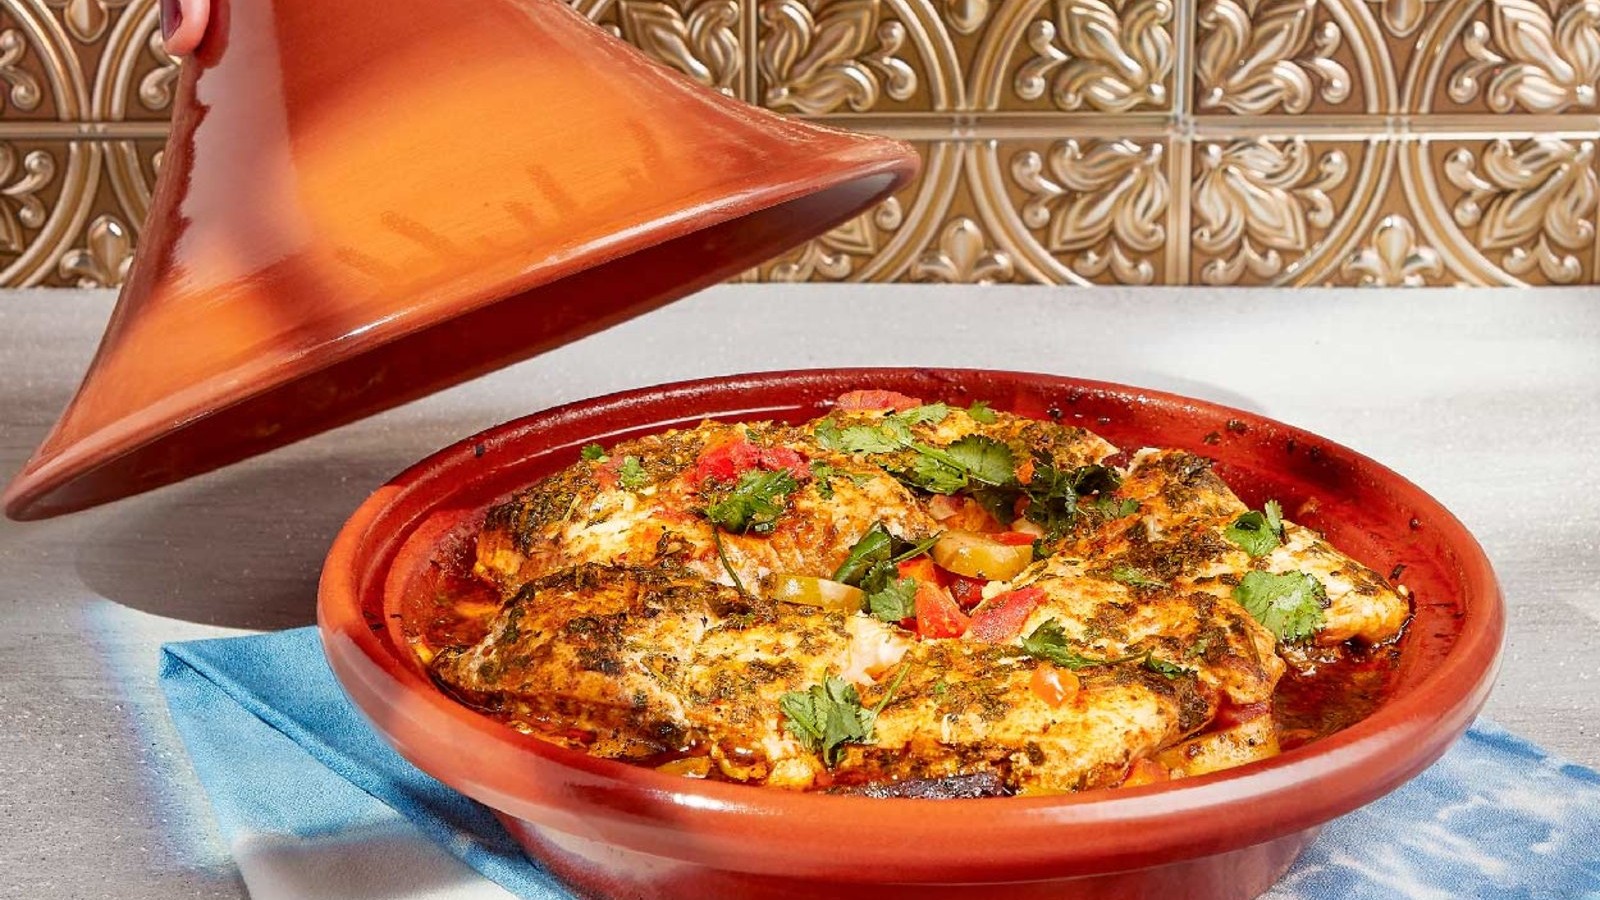 Image of Moroccan Style Fish Tagine